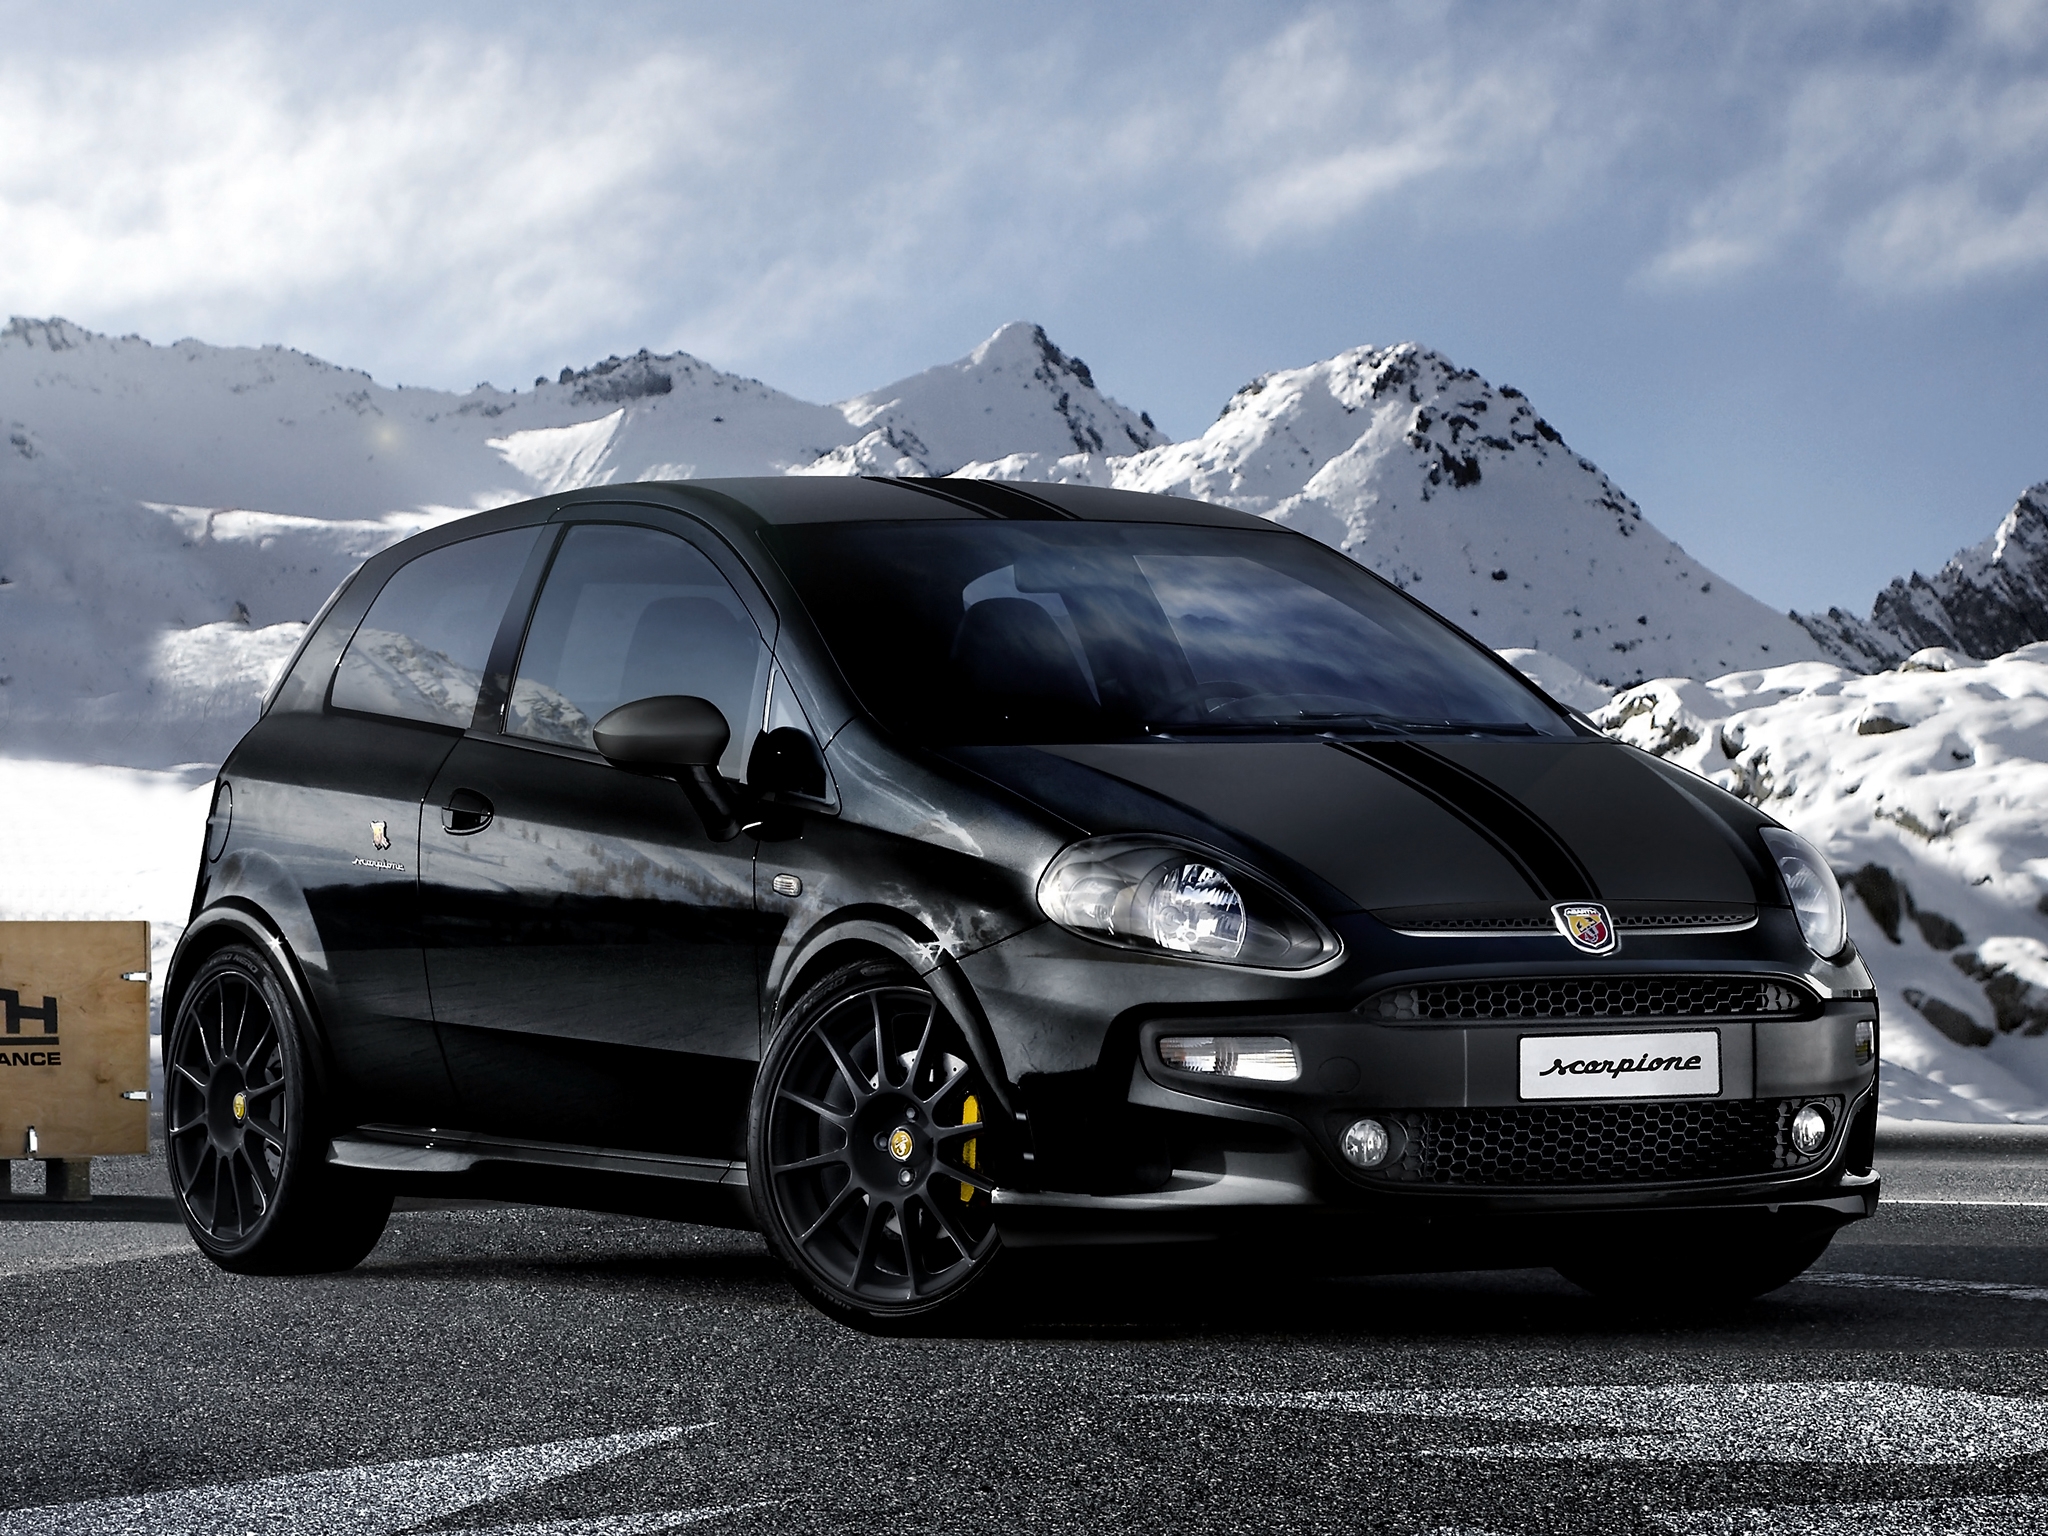 black, auto, mountains, cars, side view, stylish, abarth, scorpione Aesthetic wallpaper